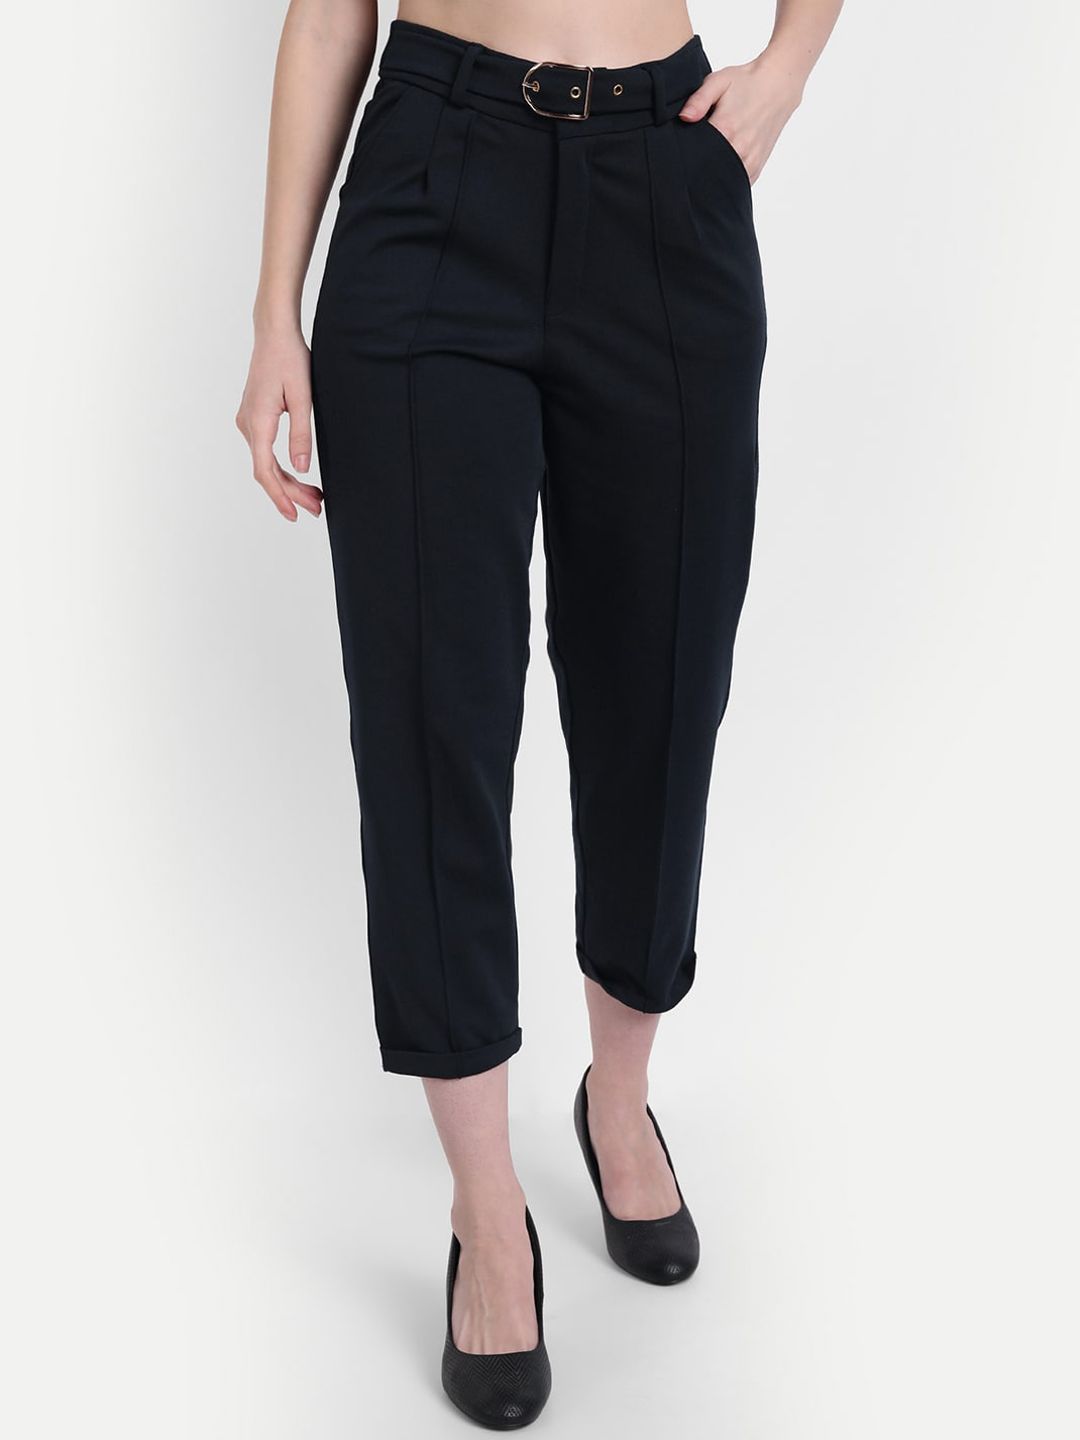 Next One Women Navy Blue Straight Fit High-Rise Trousers Price in India